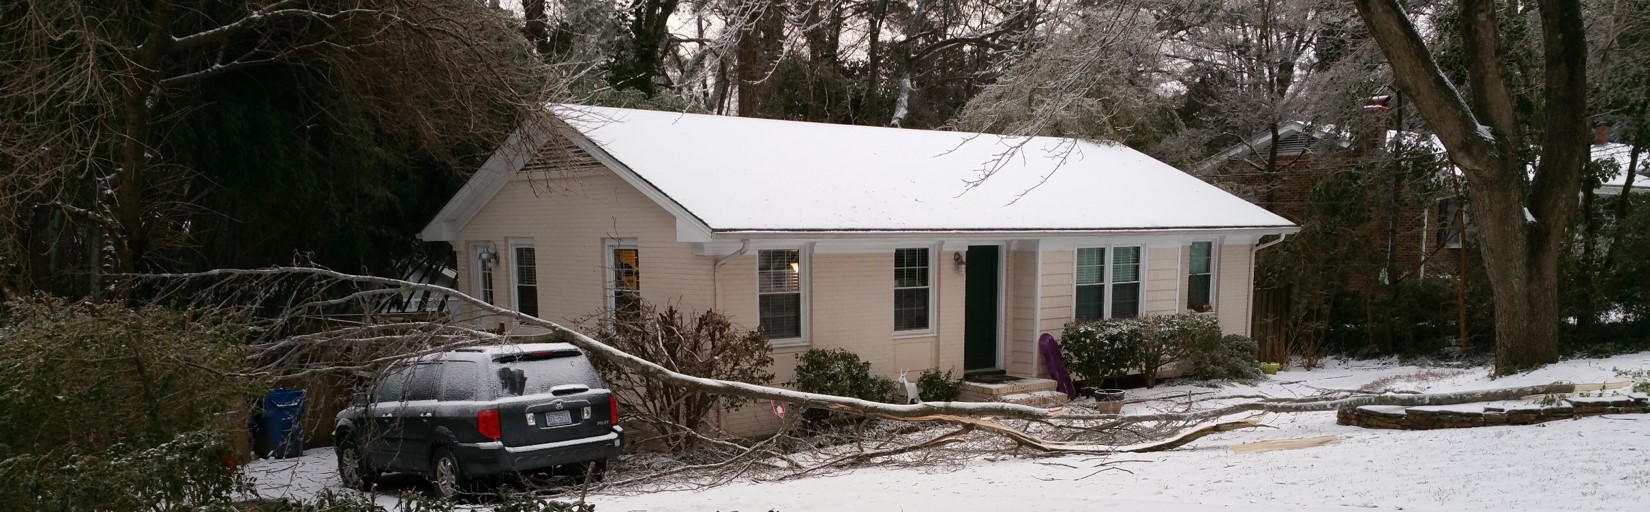 snow covered house with fallen tree